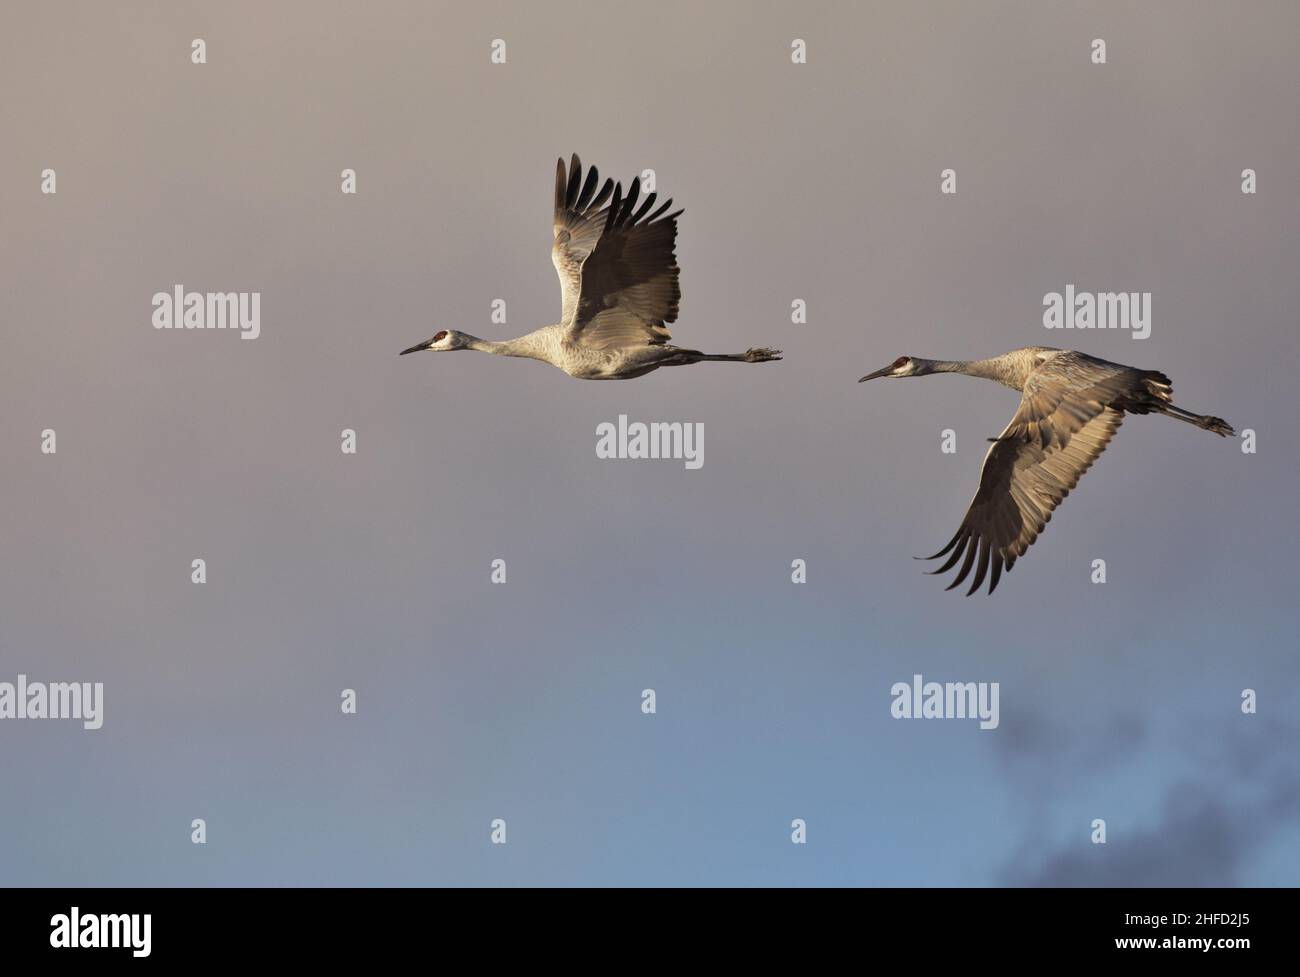 Elegant grace of pair of large Sandhill Cranes in open winged flight across subtle gray clouds and blue sky of Bernardo Waterfowl Area in New Mexico Stock Photo